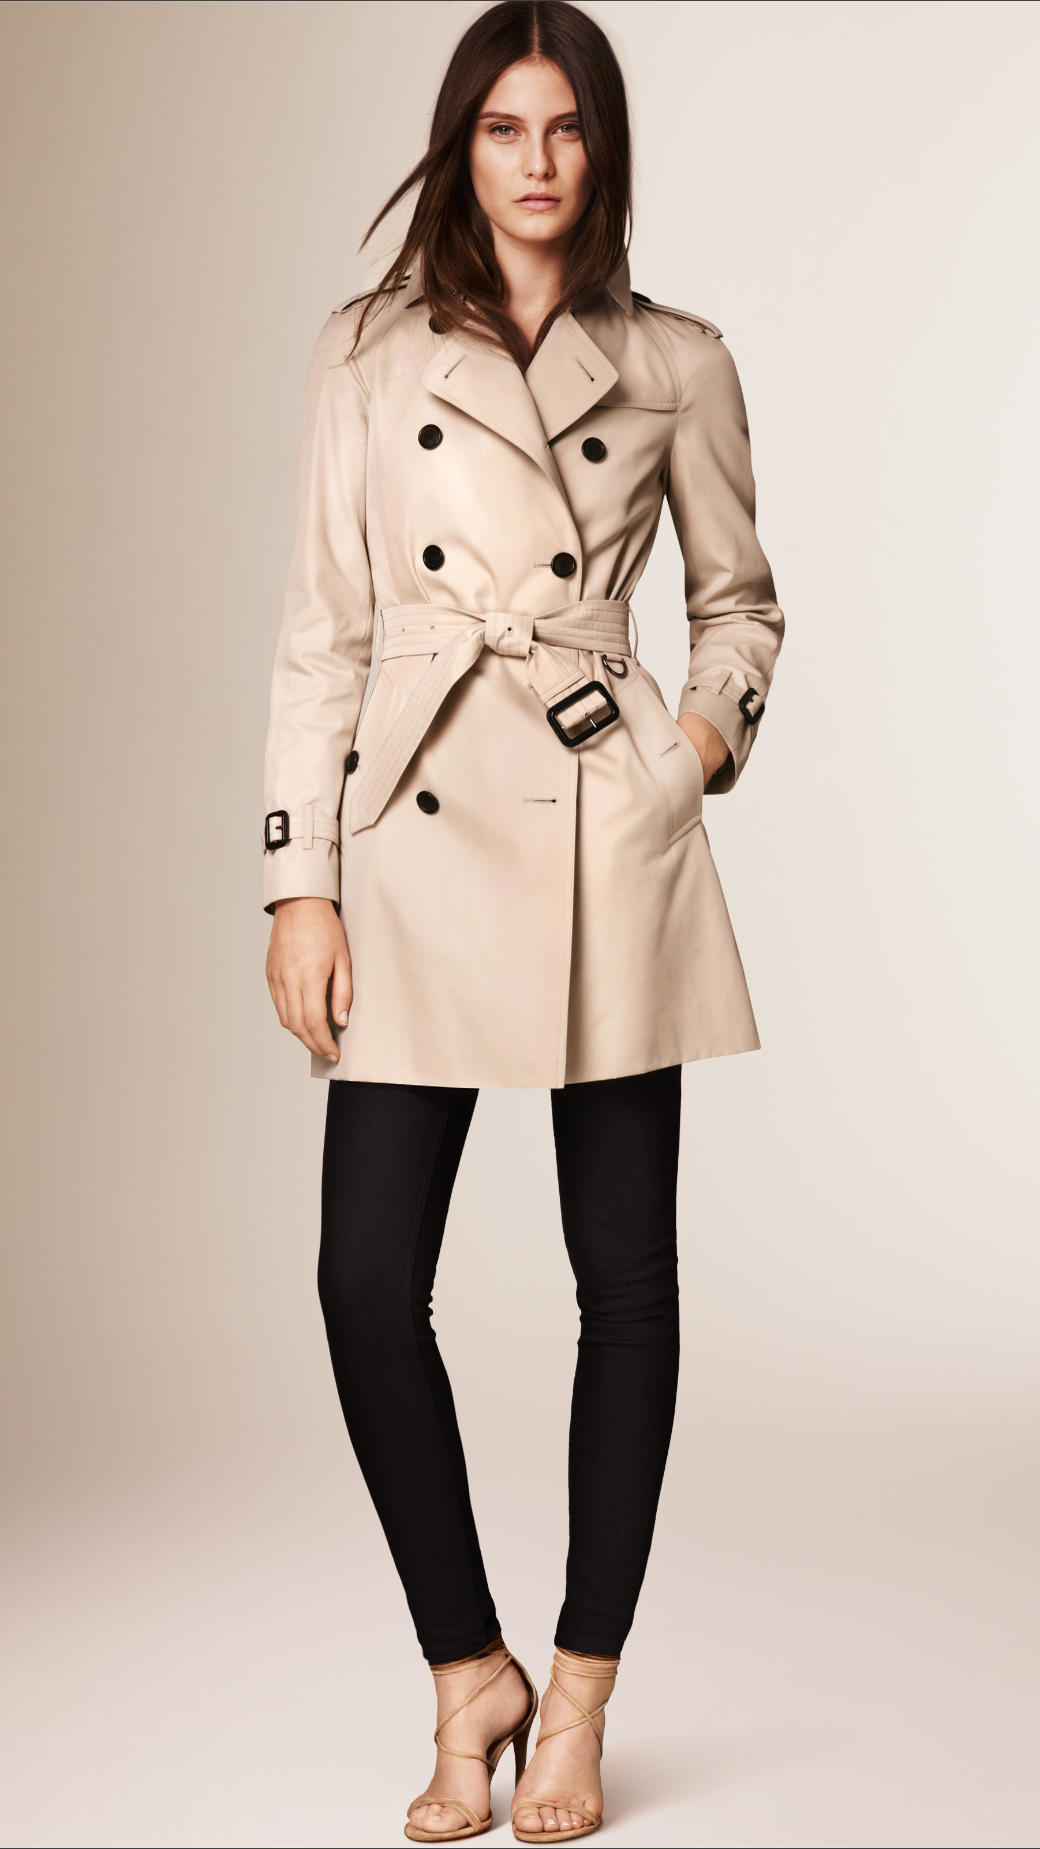 Lyst - Burberry The Westminster - Mid-length Heritage Trench Coat in ...